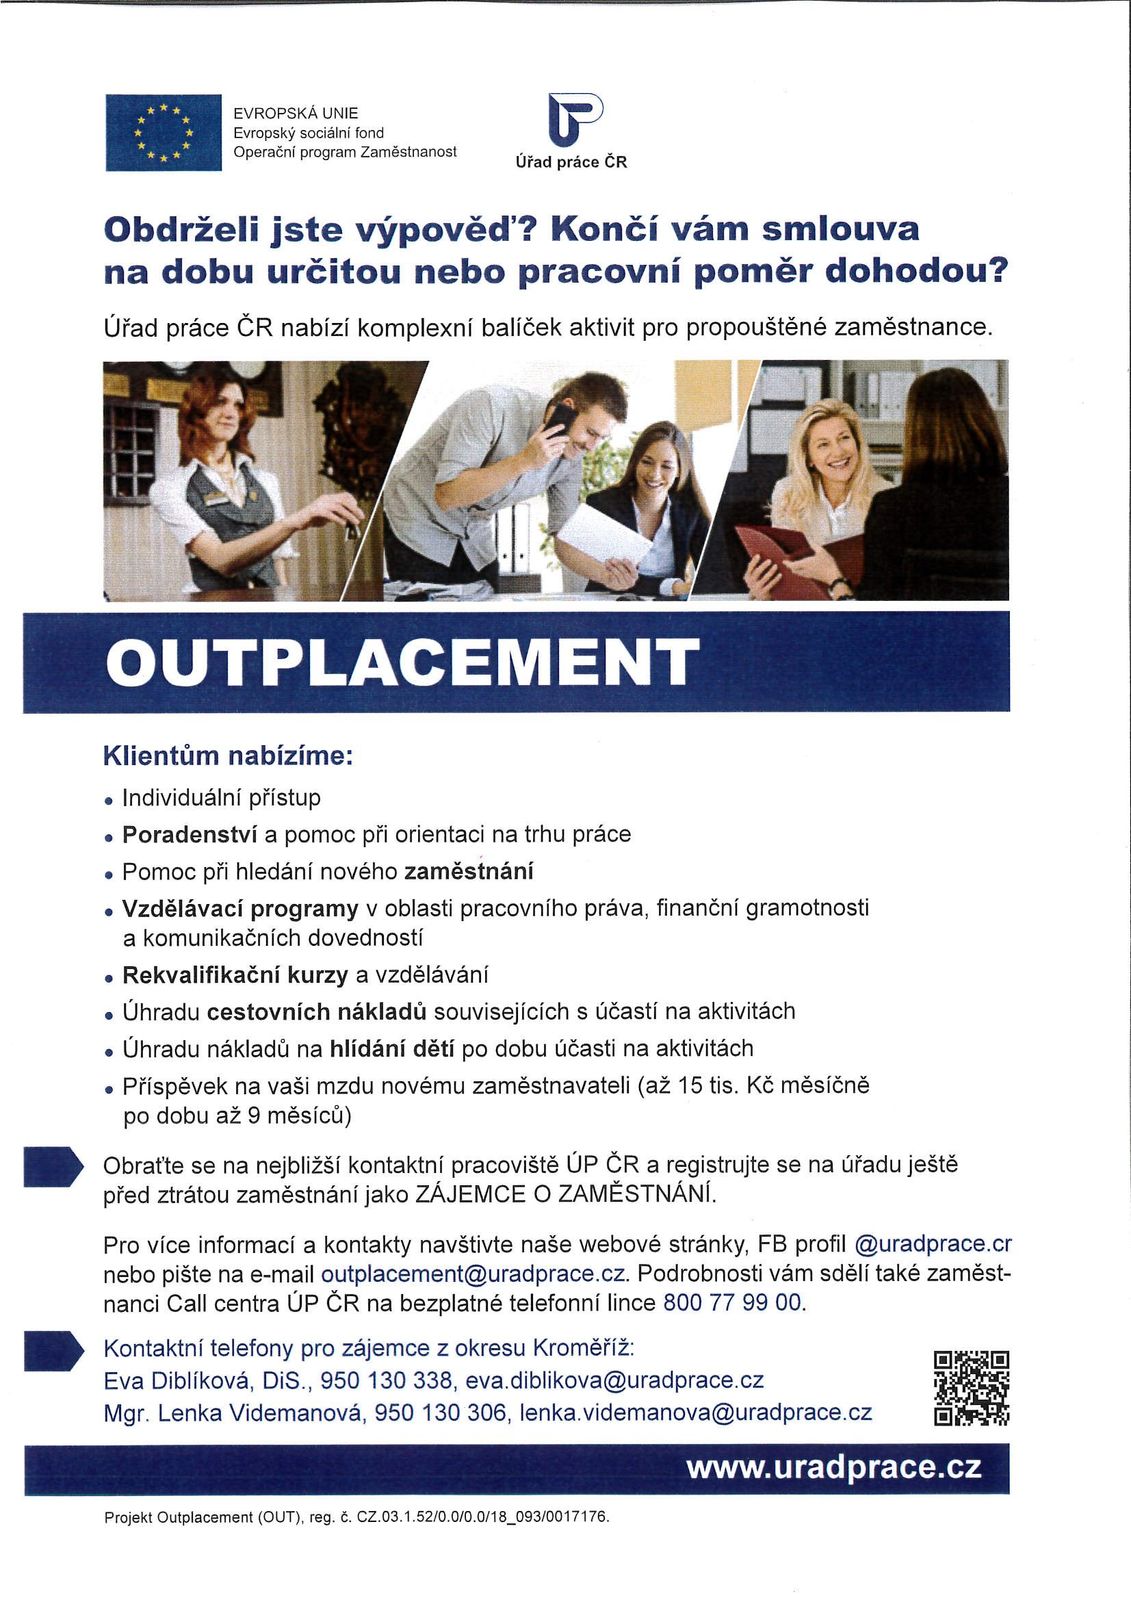 Outplacement - ÚP.jpg